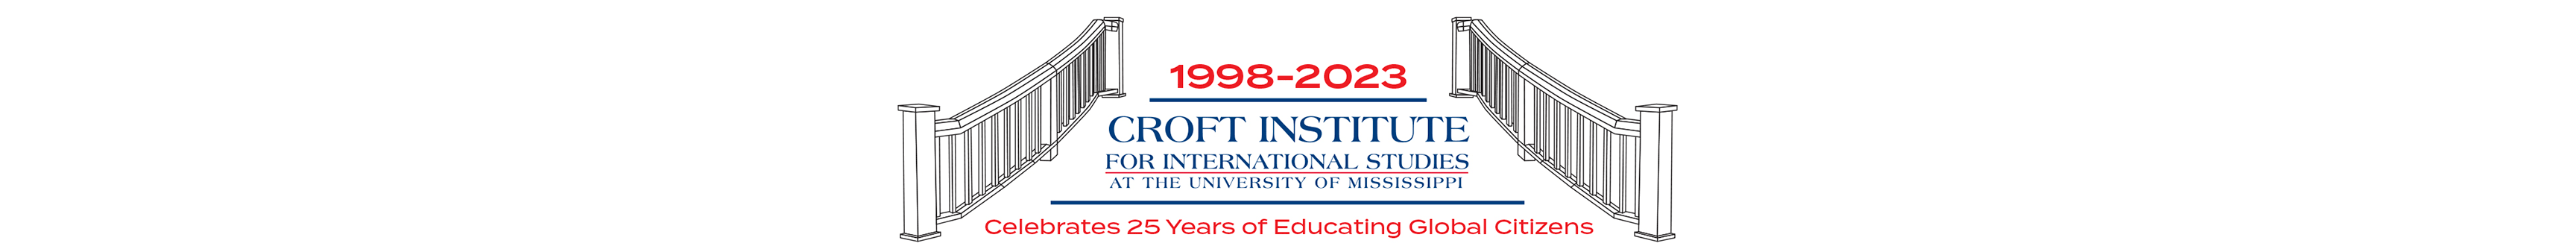 Croft Institute for International Studies: Celebrates 25 years of Educating Global Citizens